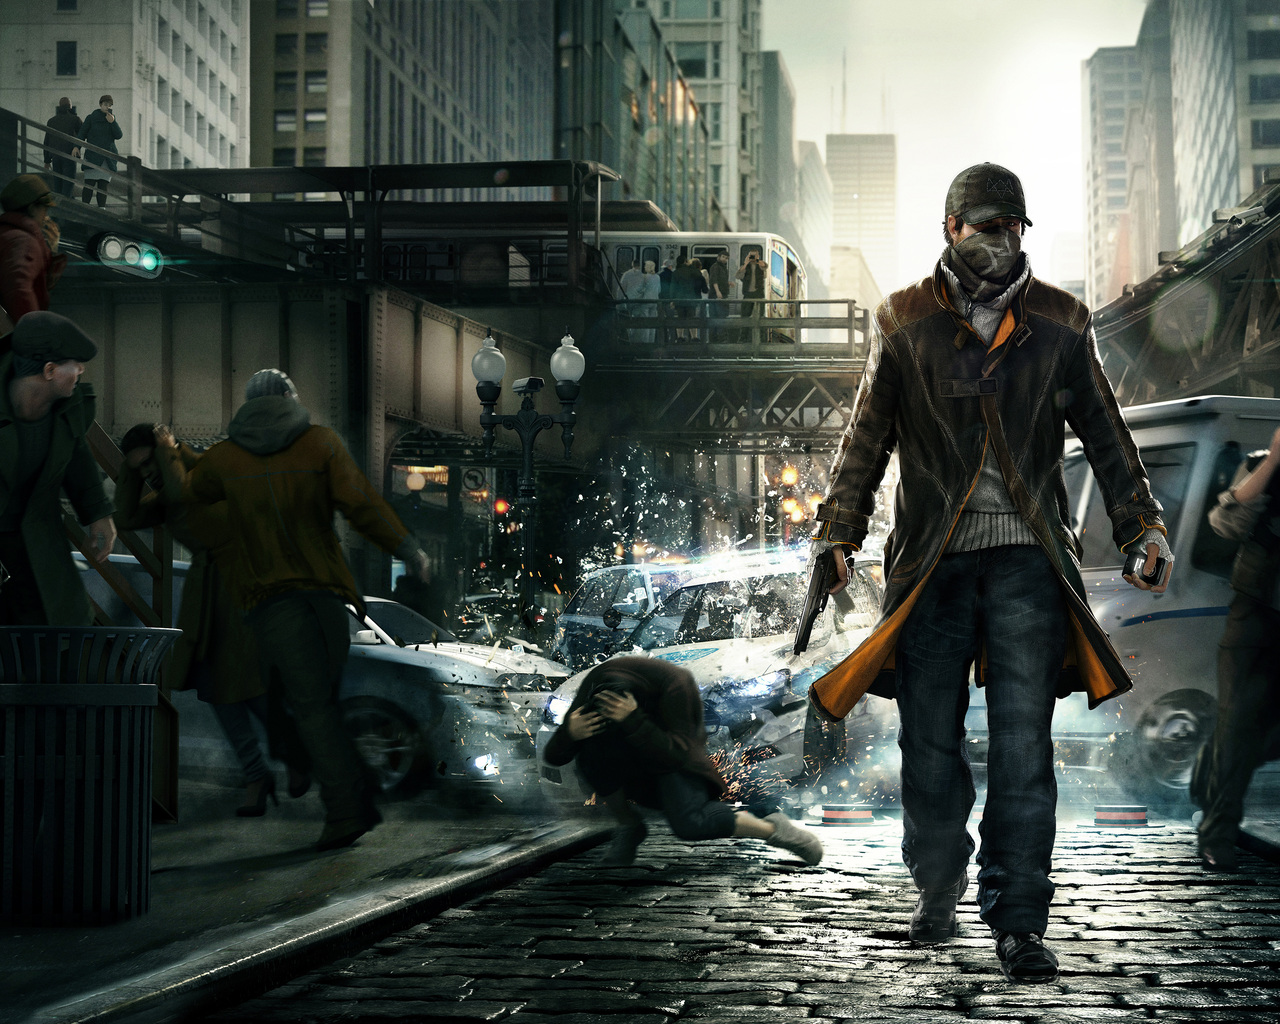 Watch Dogs Wallpapers on WallpaperDog